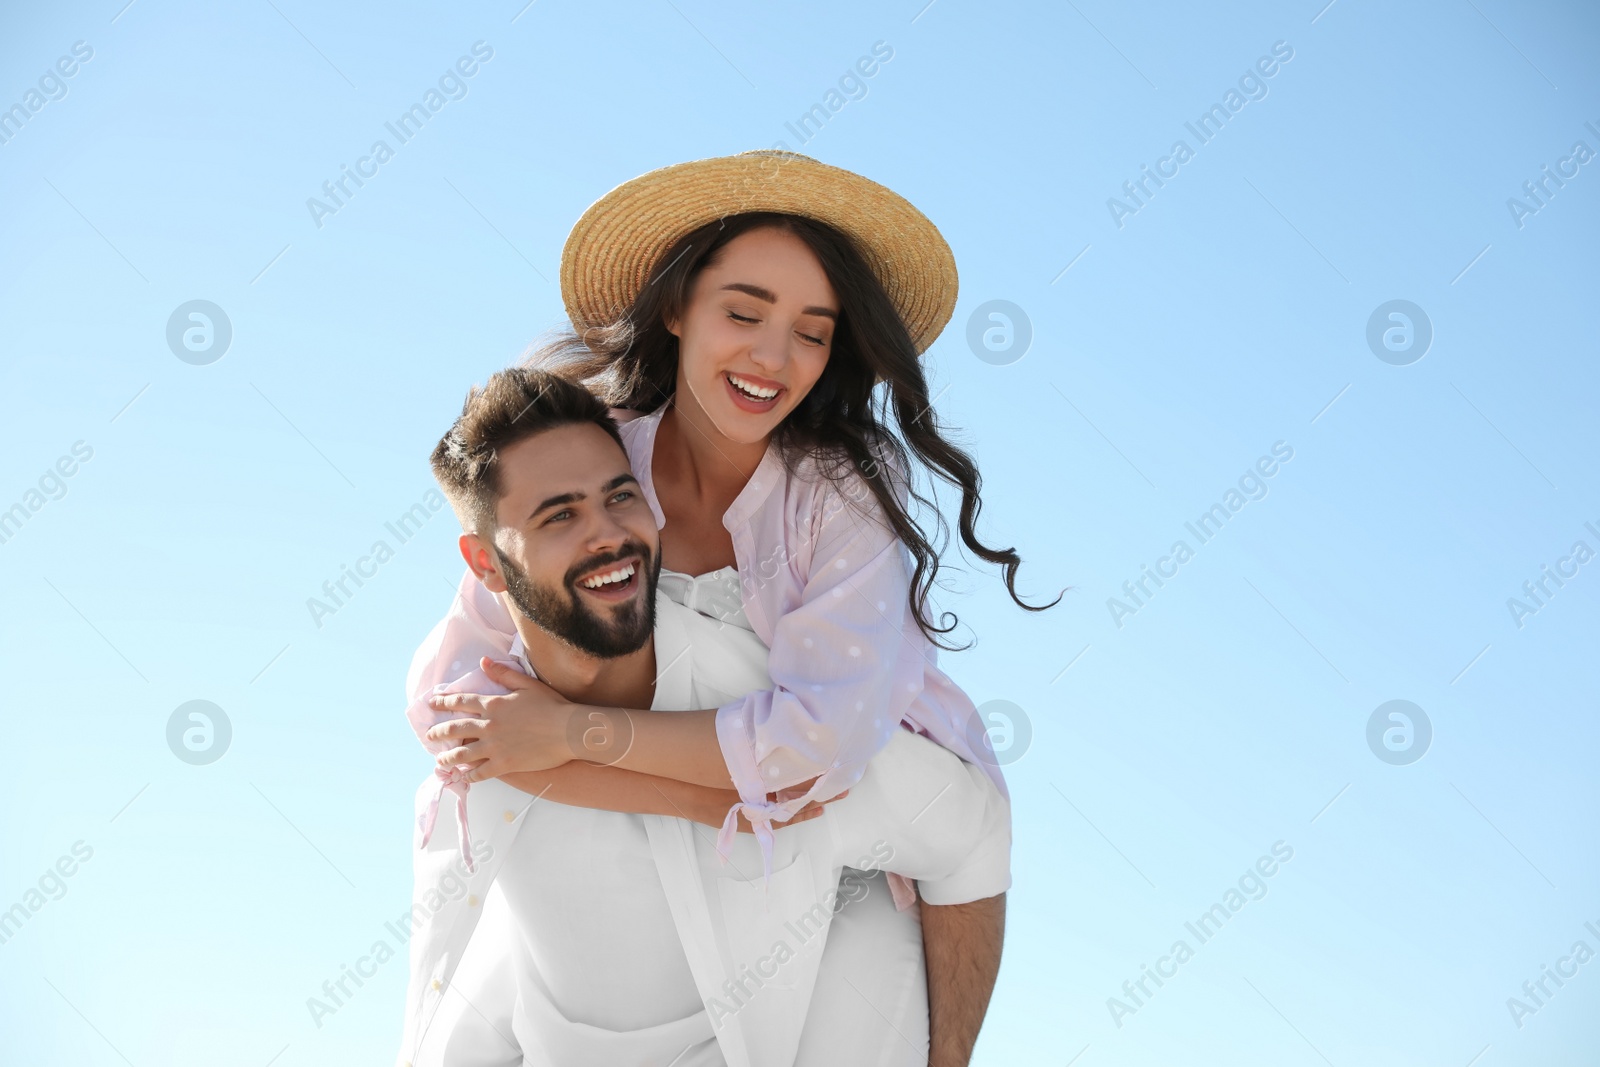 Photo of Happy young couple having fun against blue sky. Honeymoon trip